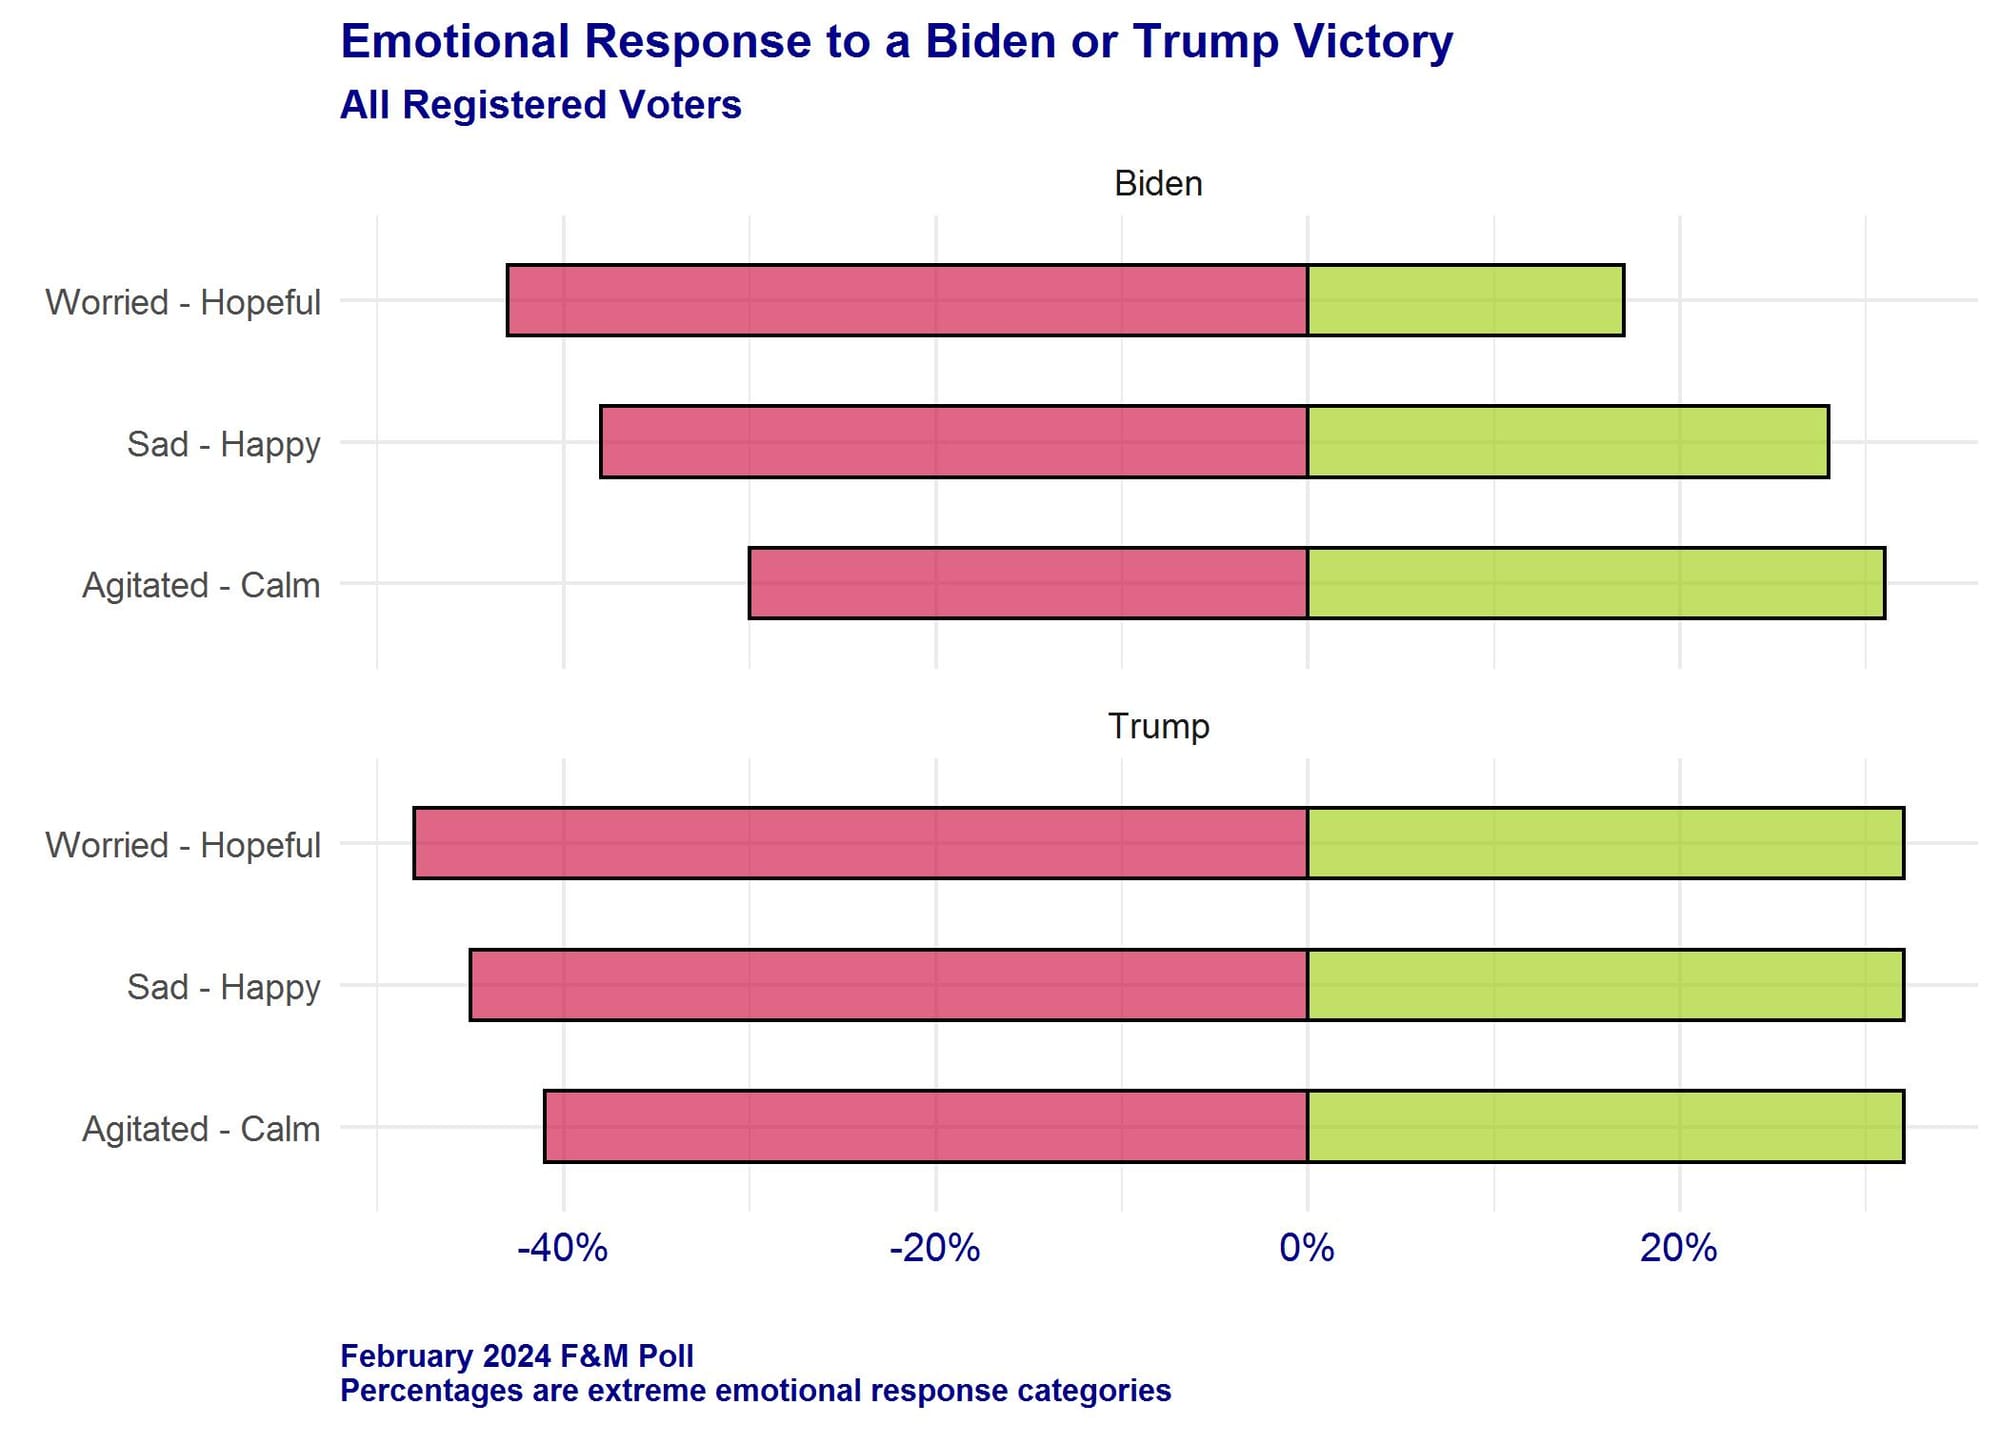 Figure 1. Bar graph showing February 2024 F&M Poll data on all registered voters' emotional responses to a Biden or Trump victory. Response categories are happy-sad, worried-hopeful, and agitated-calm.